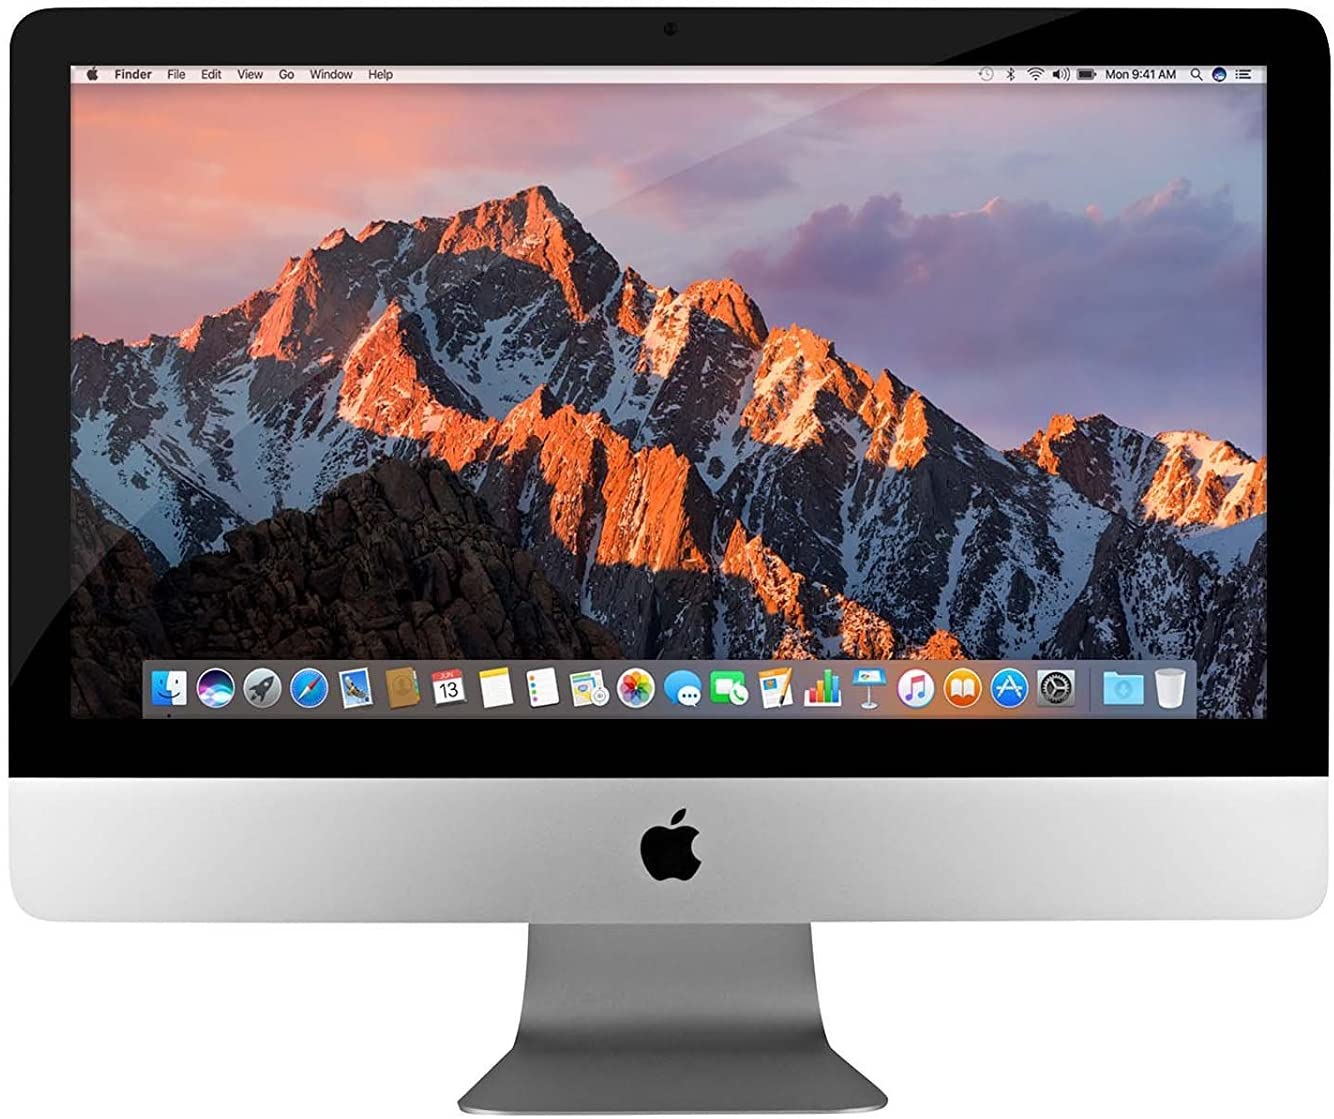 Apple iMac 21.5-inch 3.3GHz Core i3 (Early 2013) ME699LL/A